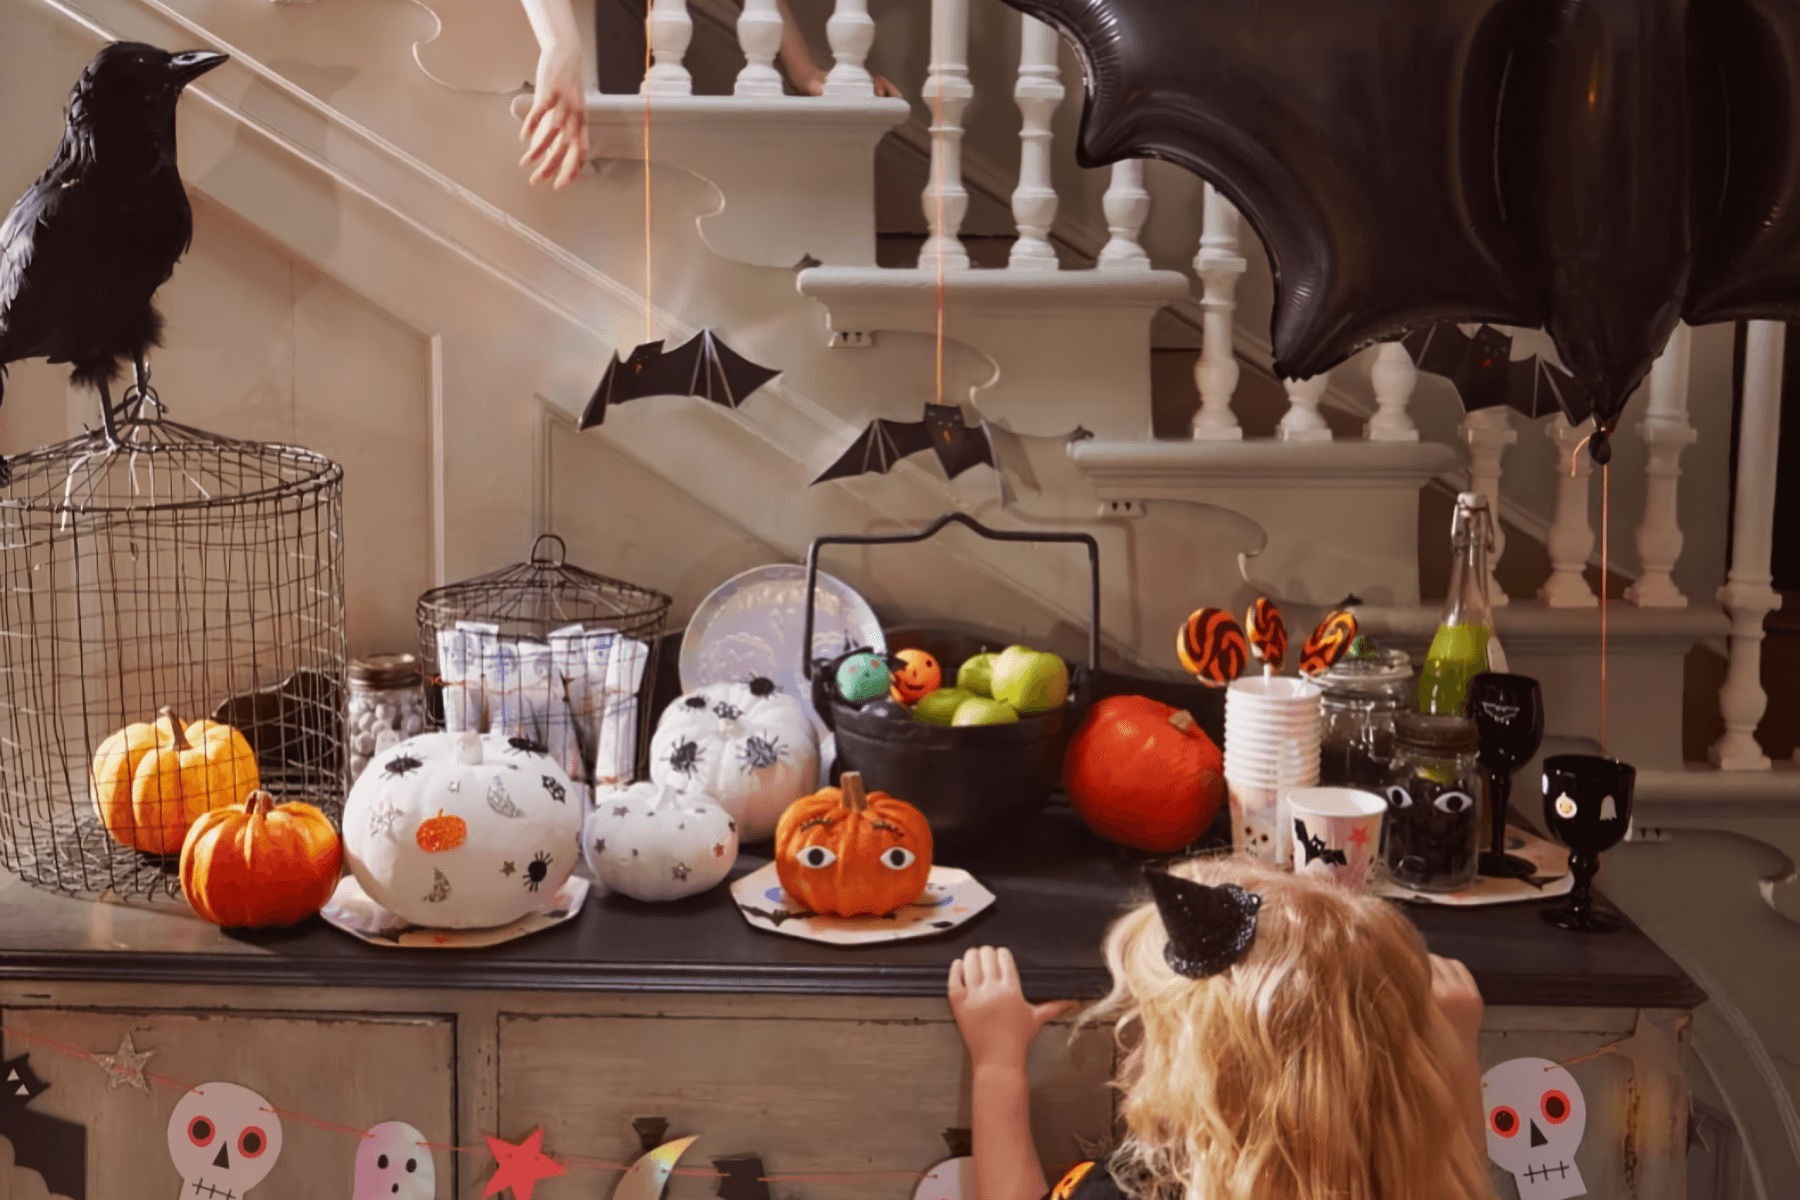 Halloween Inspiration: Silly Monster and Ghost Doors and more